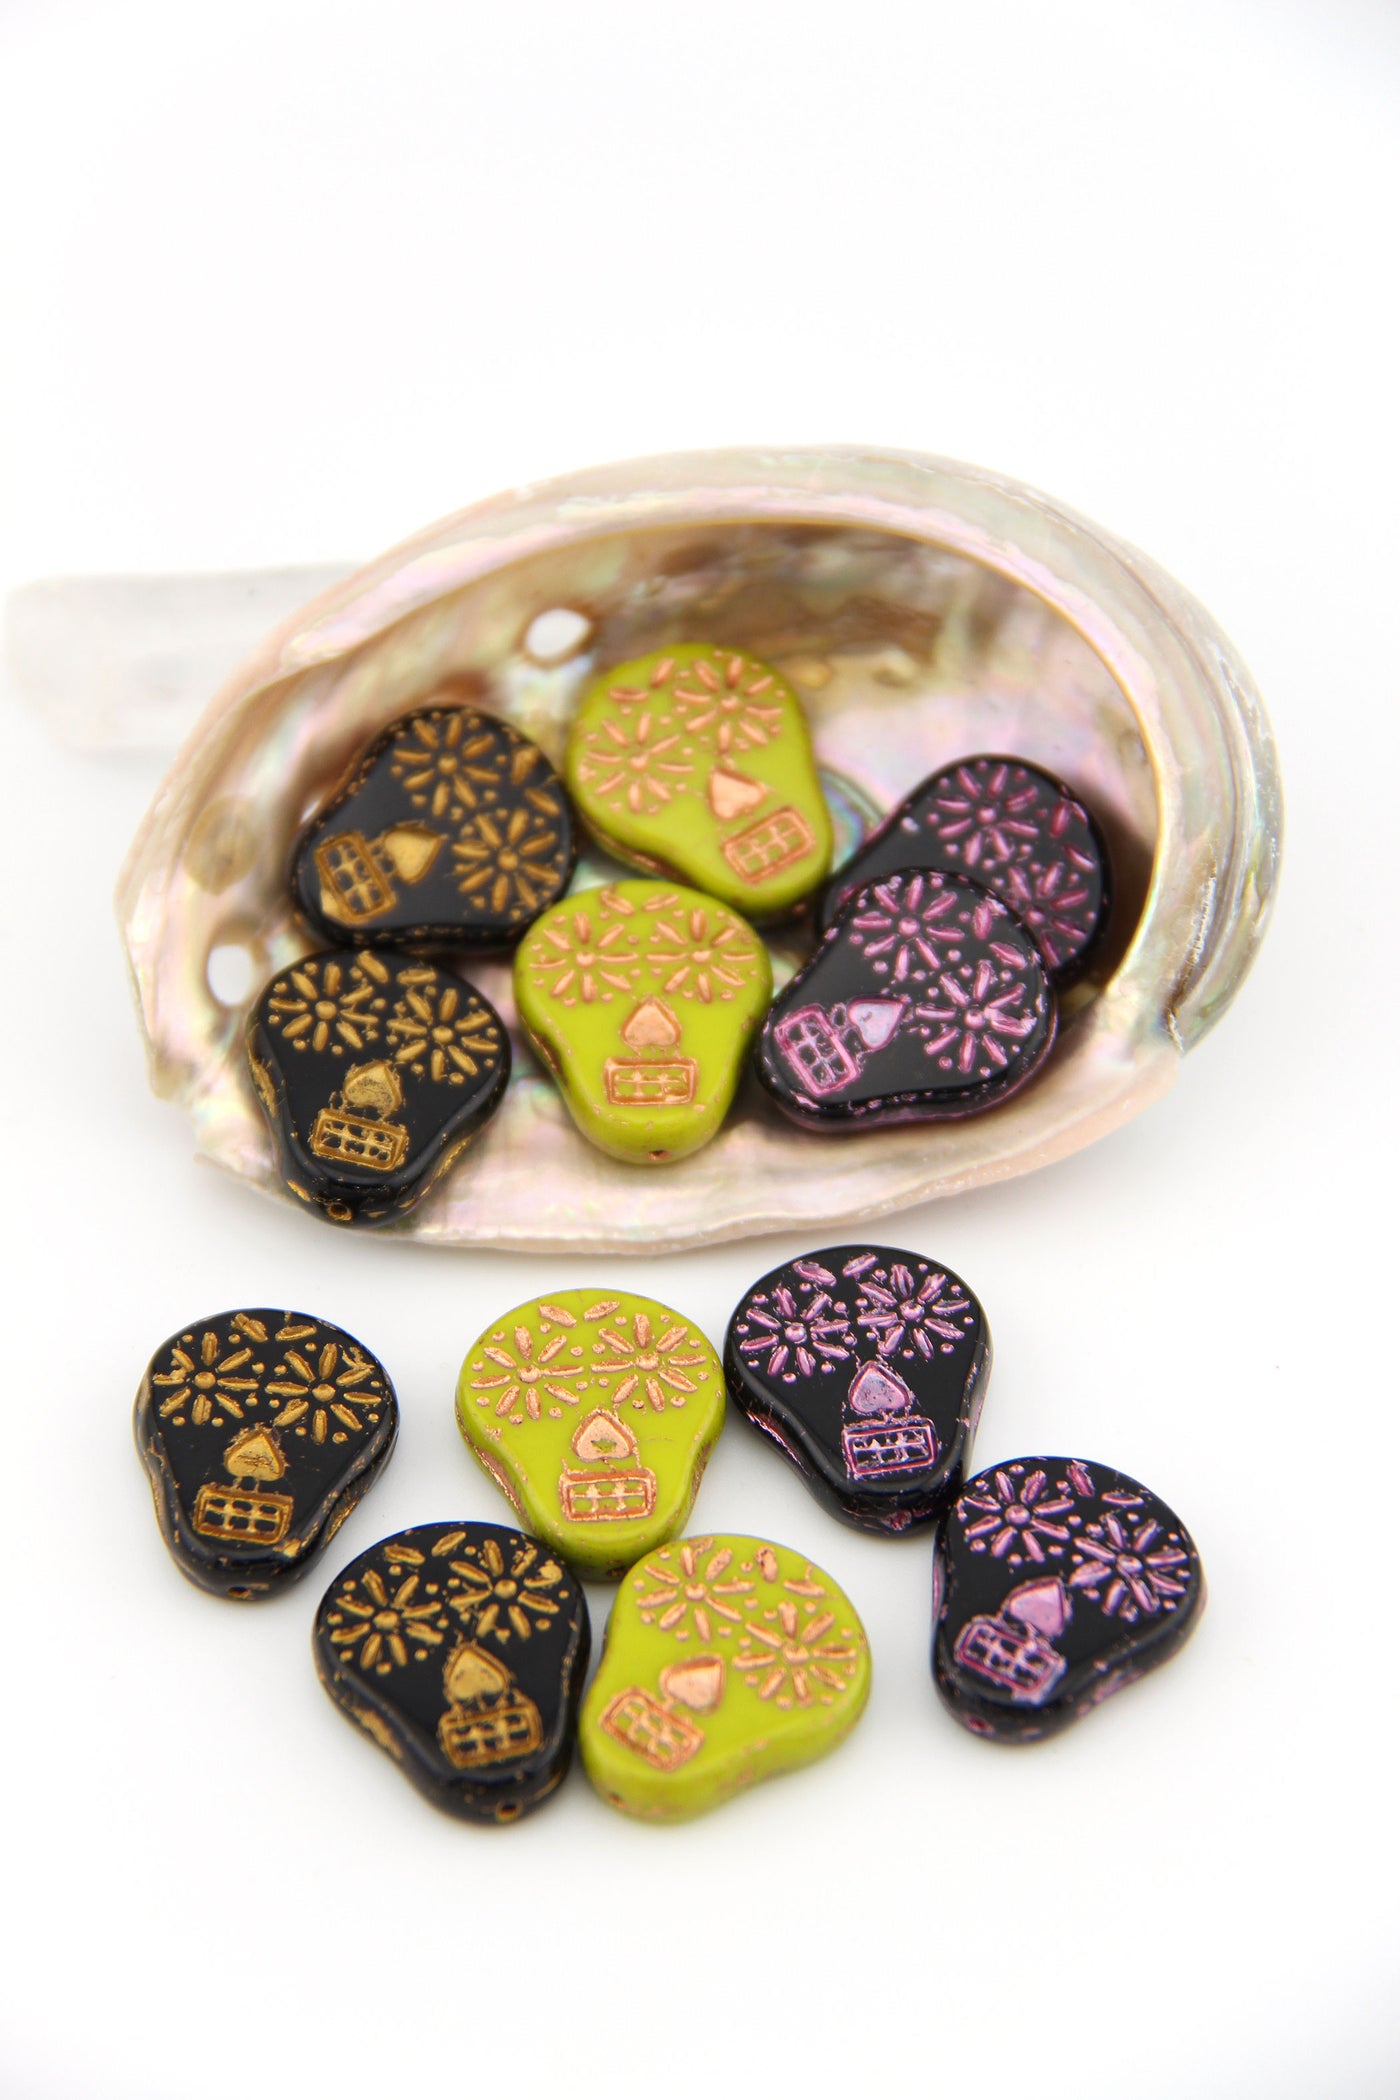 Sugar Skull Beads with Metallic Details, Czech Glass, 4 pieces, 20x16mm in Black with Gold, Avocado 